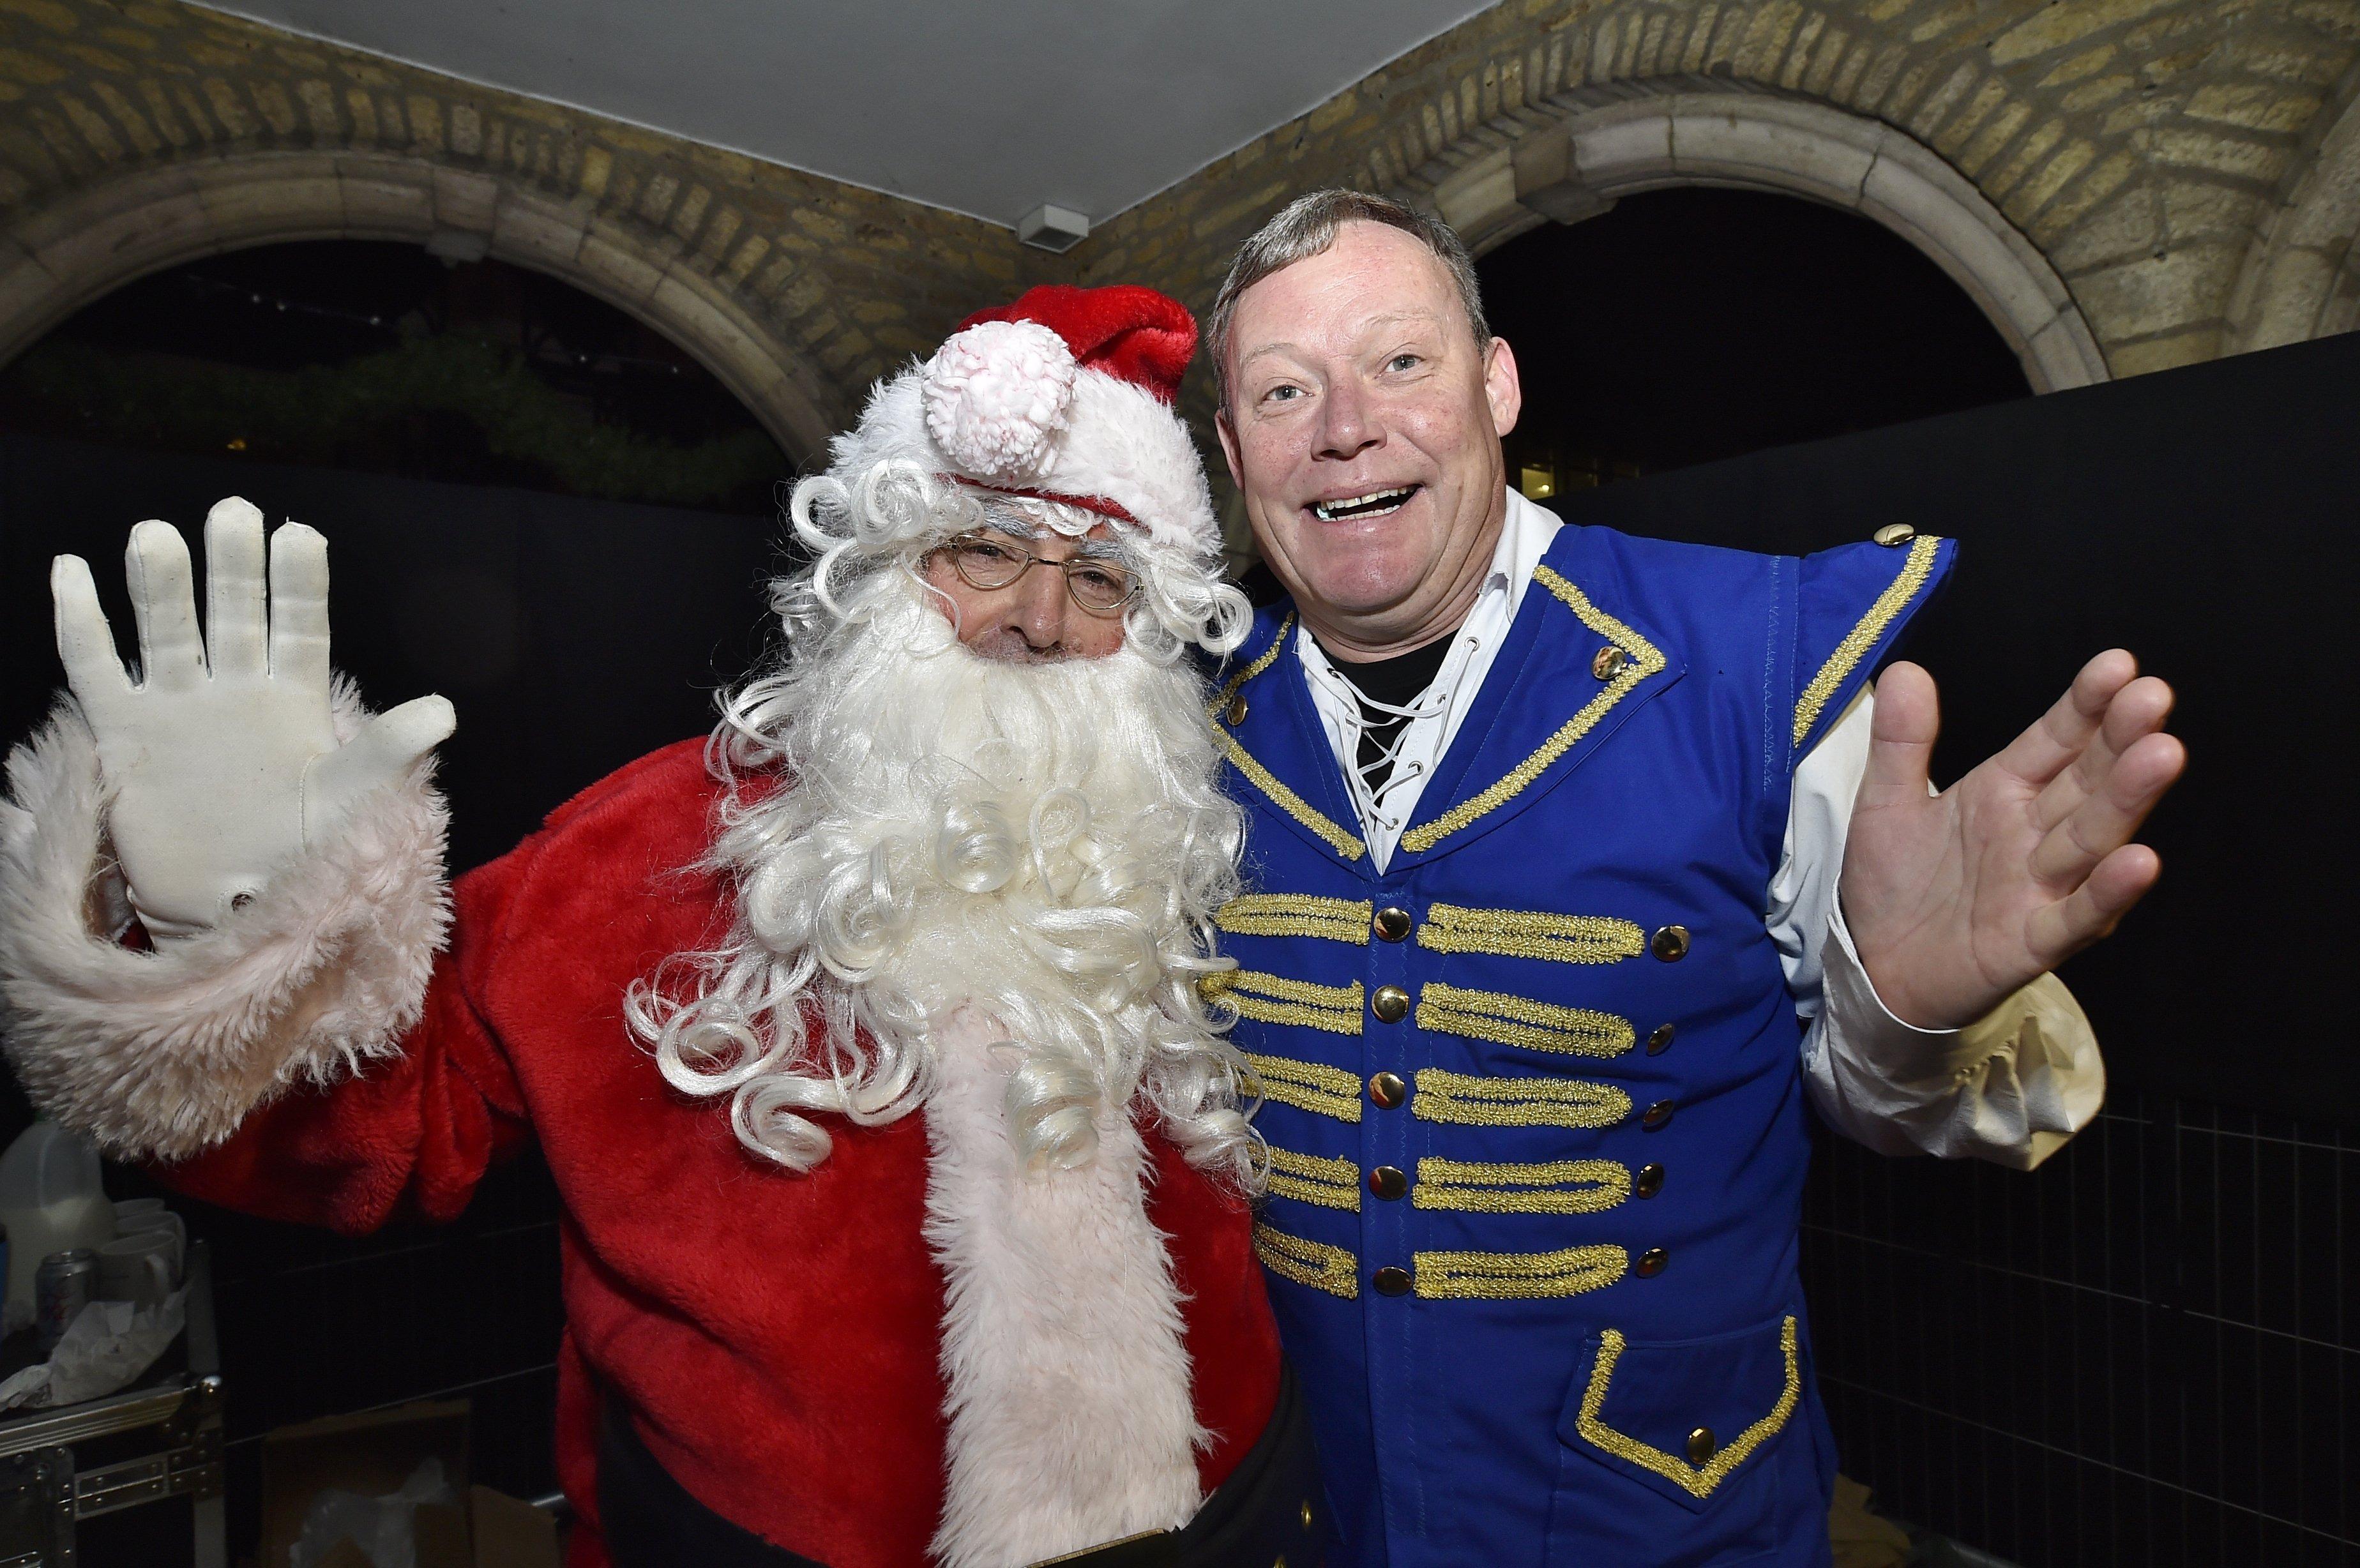 The lights turned on in Cathedral Square. Father Christmas and Ricky Grove from the Cresset panto